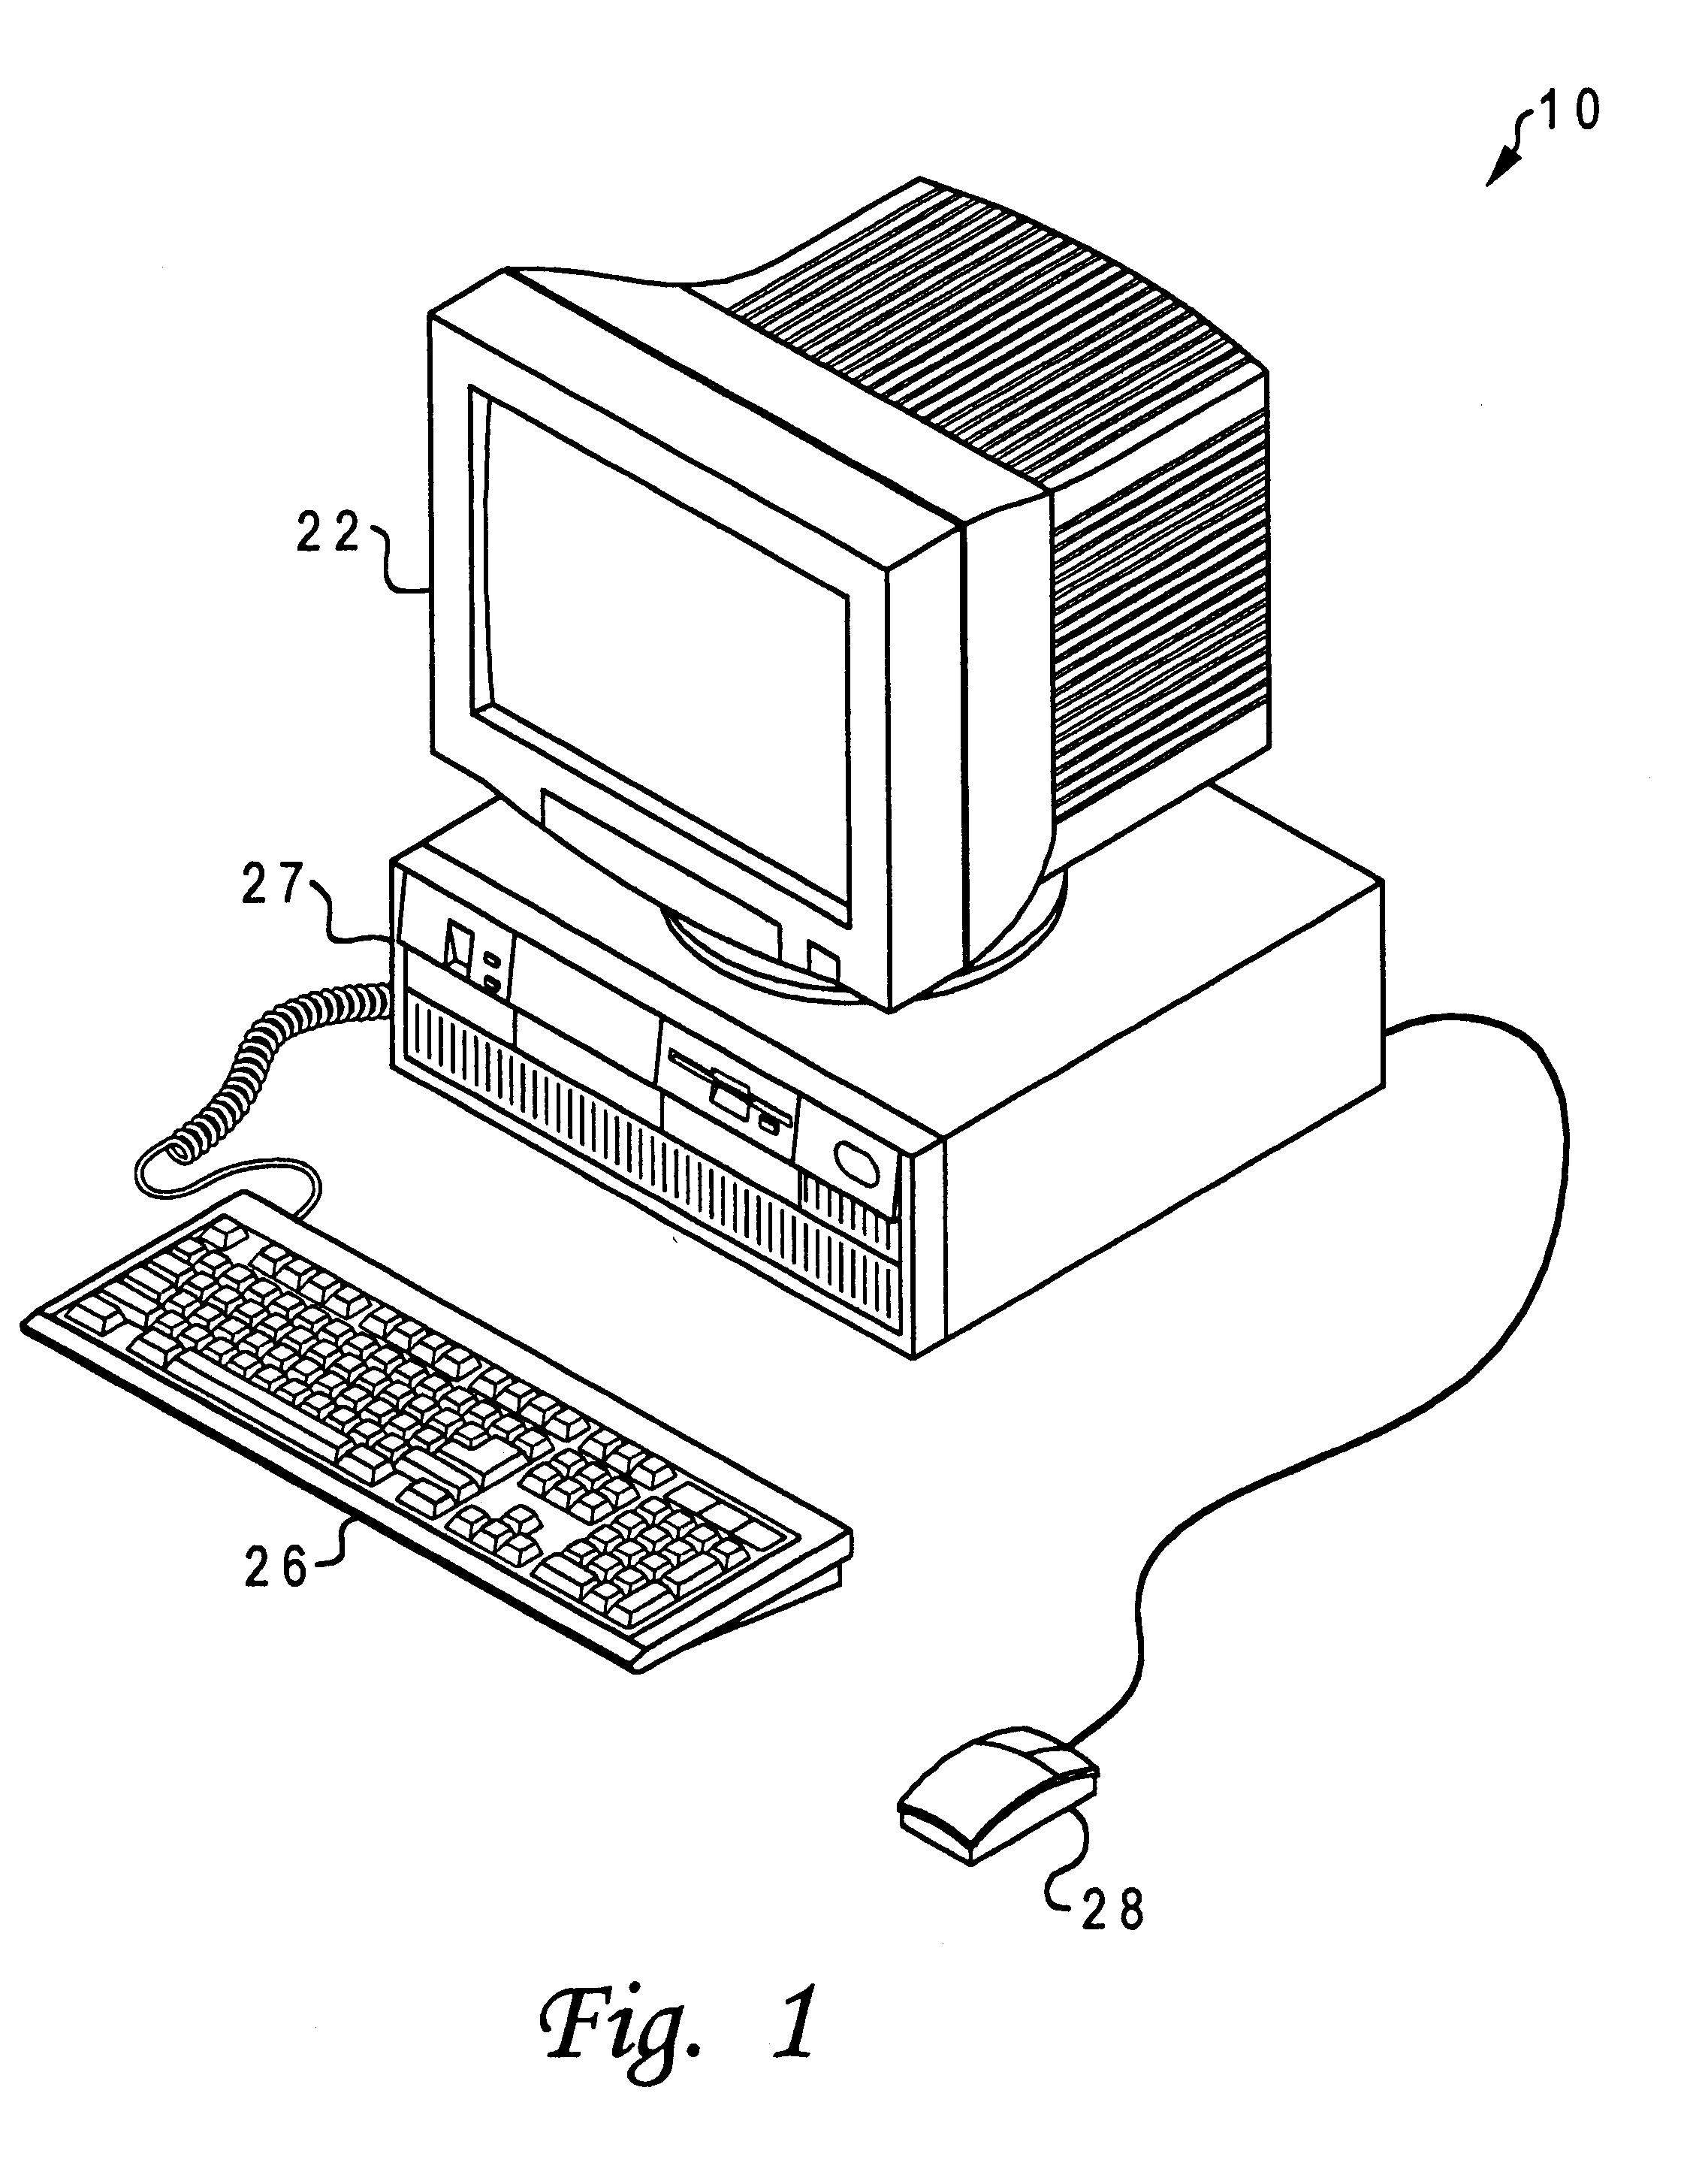 Printed circuit board for coupling surface mounted optoelectric semiconductor devices